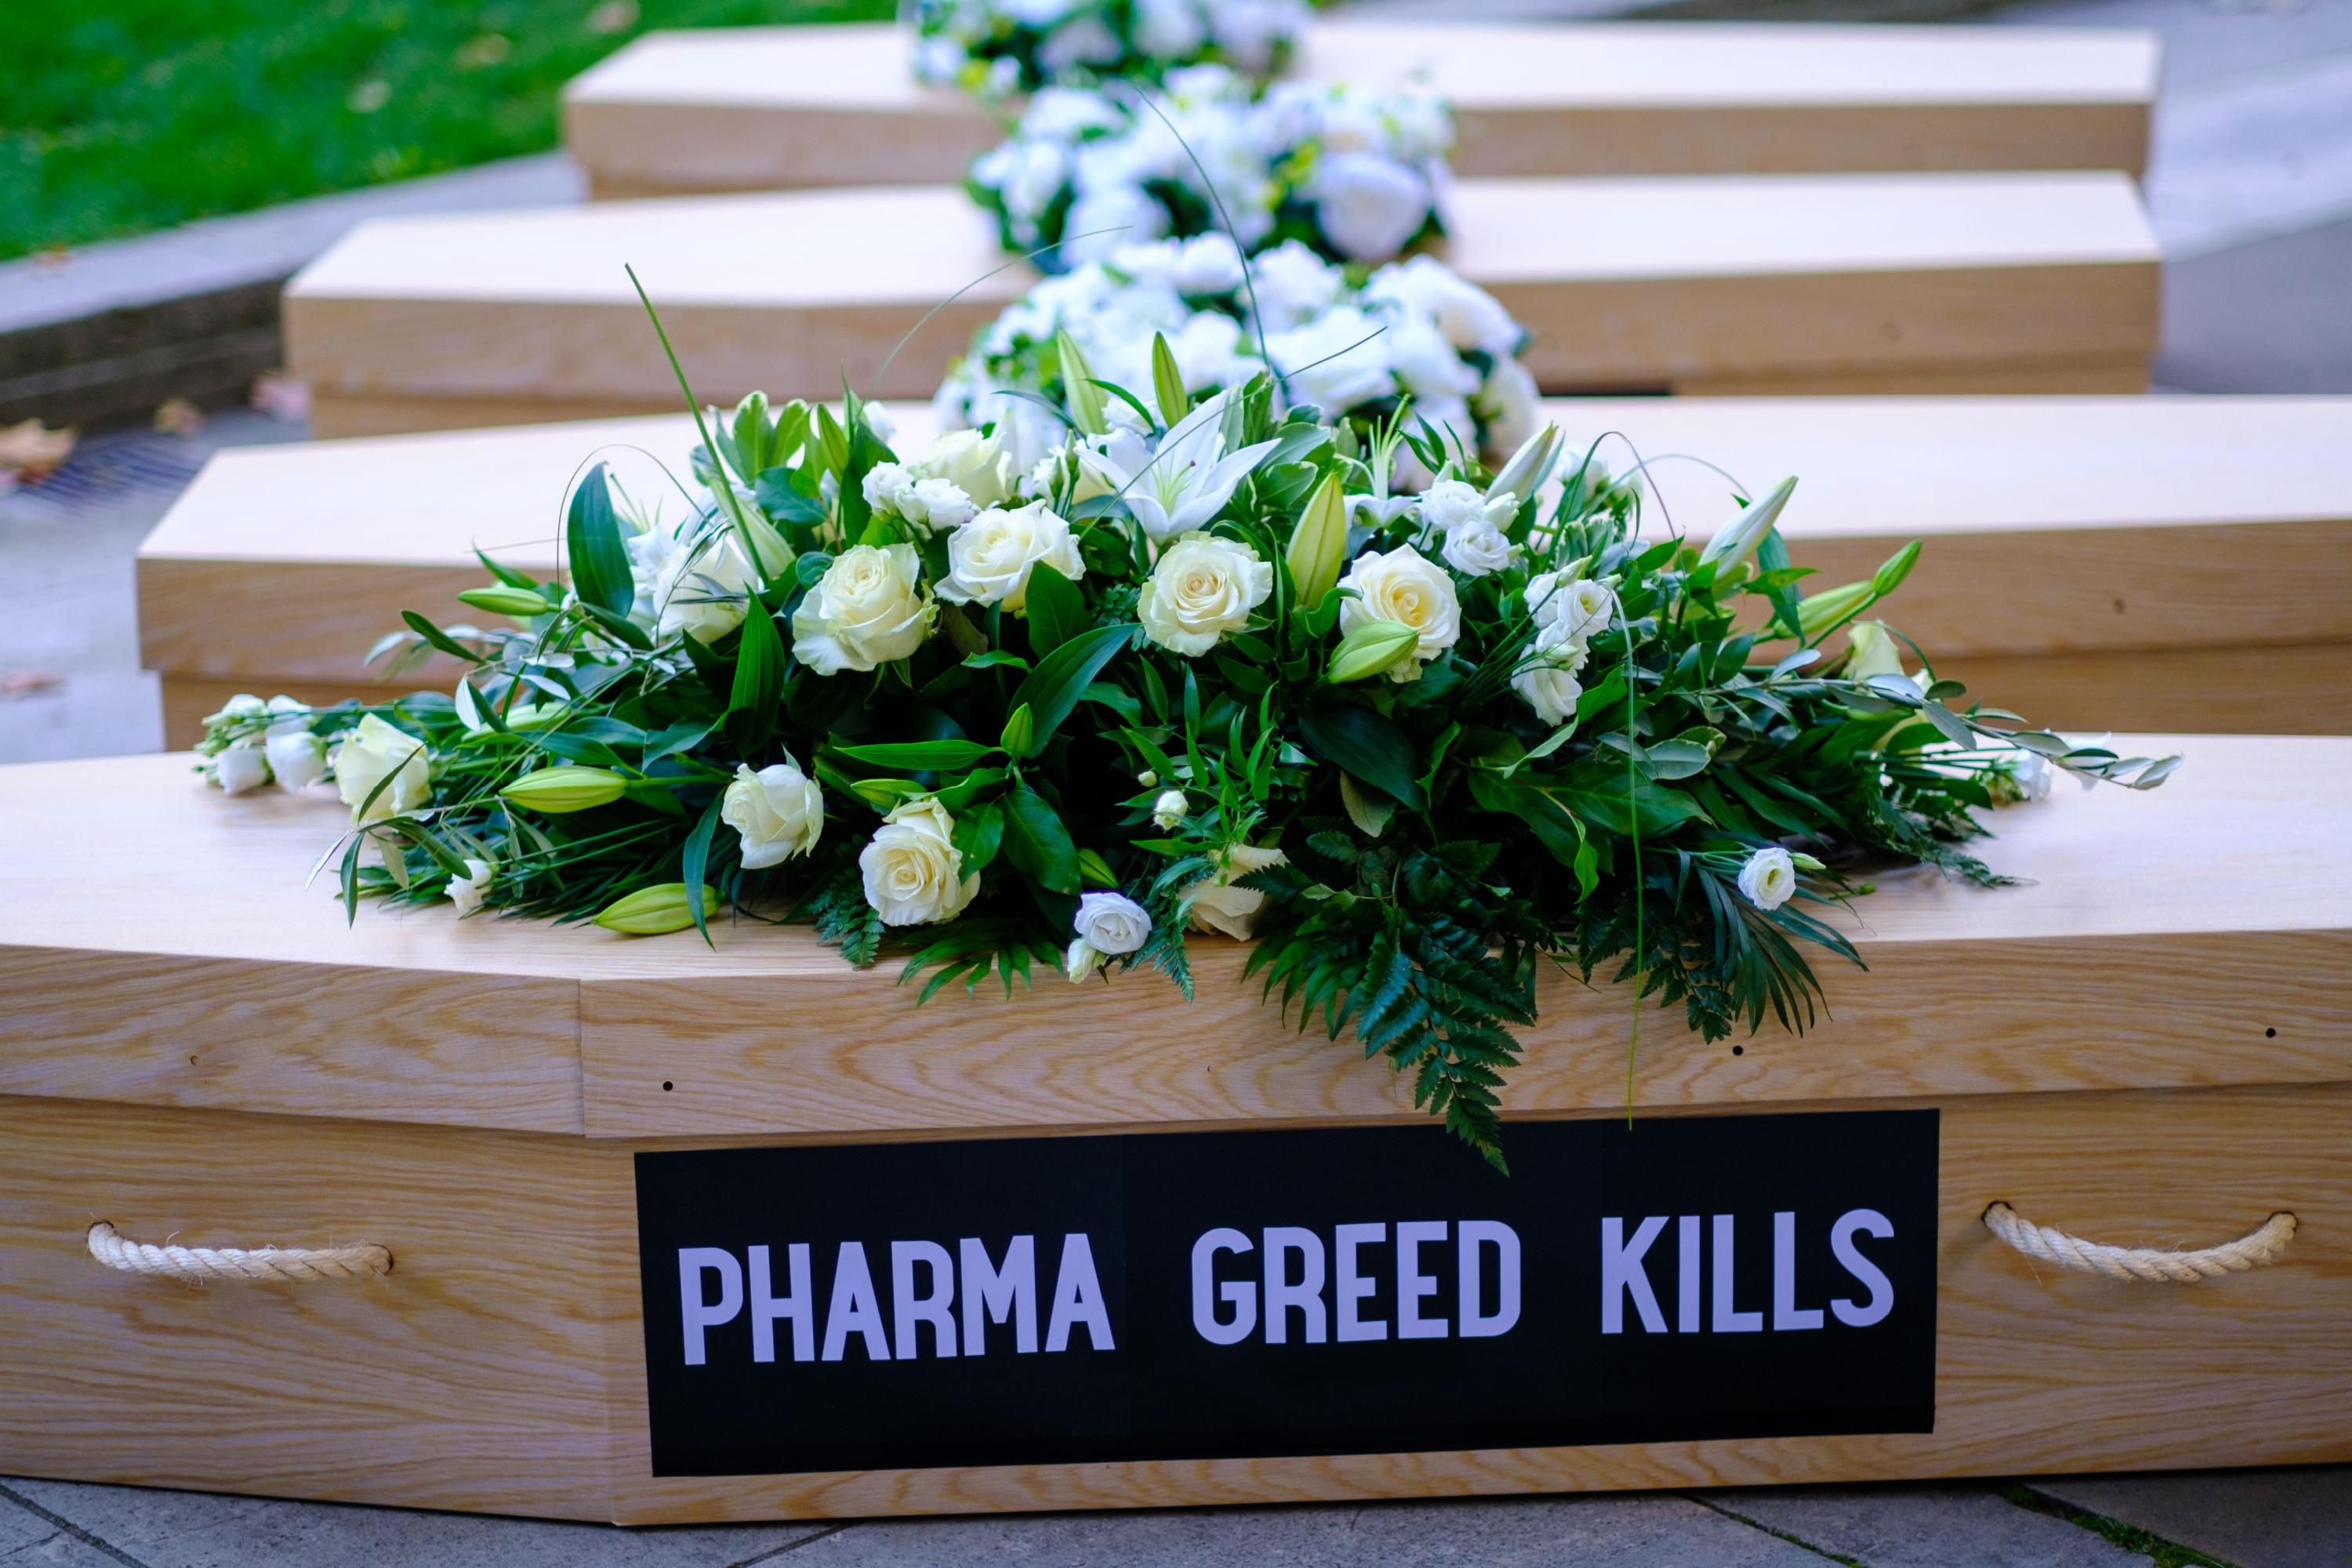 Protesters attached a "pharma greed kills" sign to a mock coffin